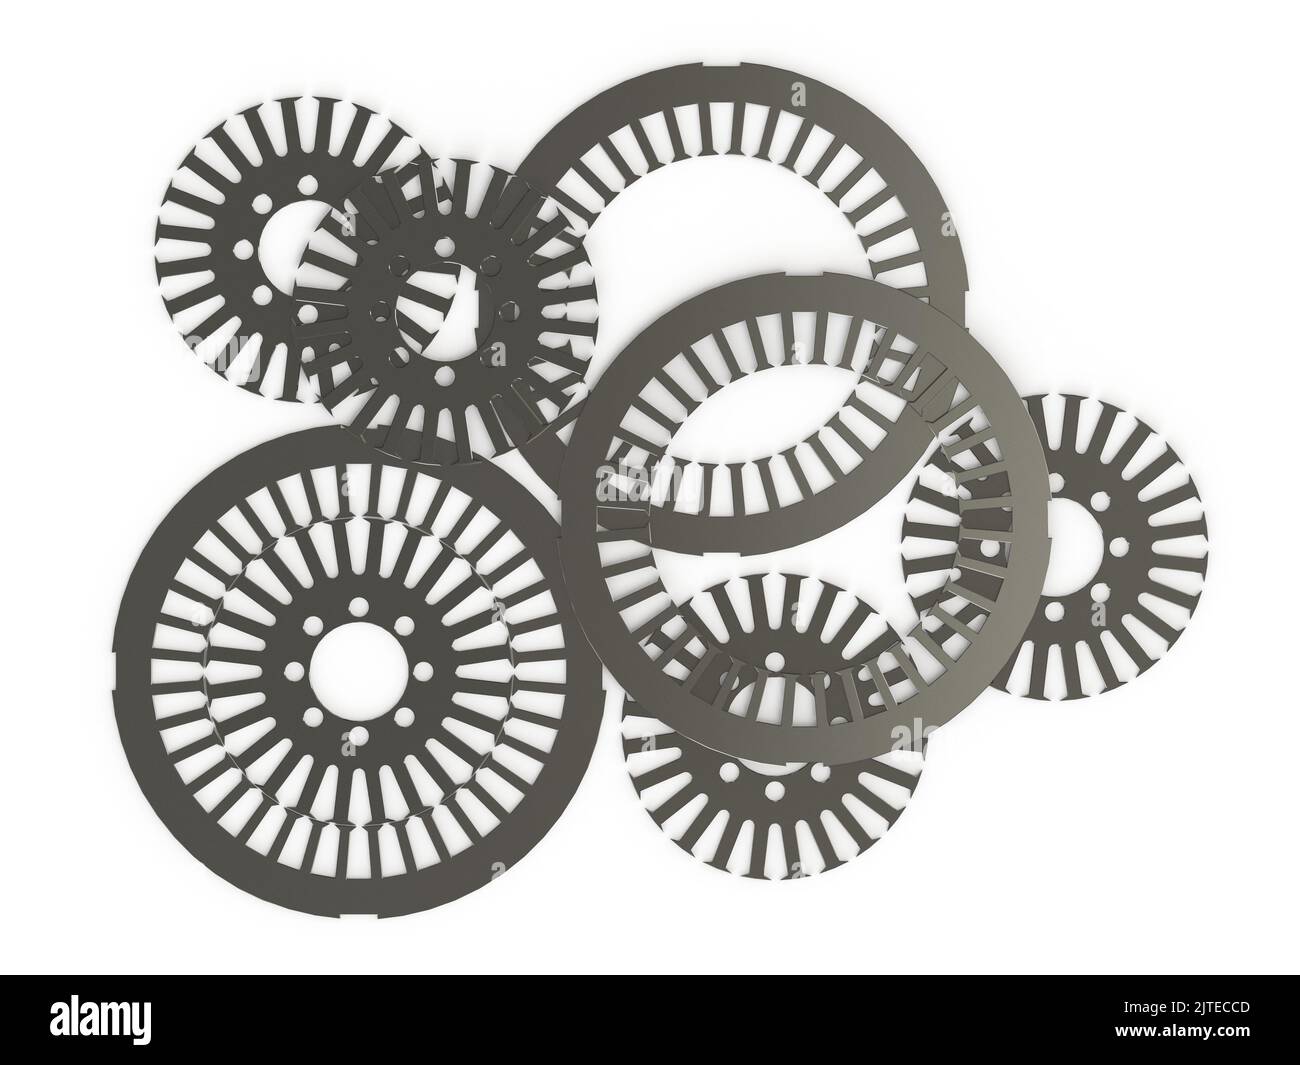 Stator and rotor electromagnetic sheet for electric motor 3D rendering Stock Photo